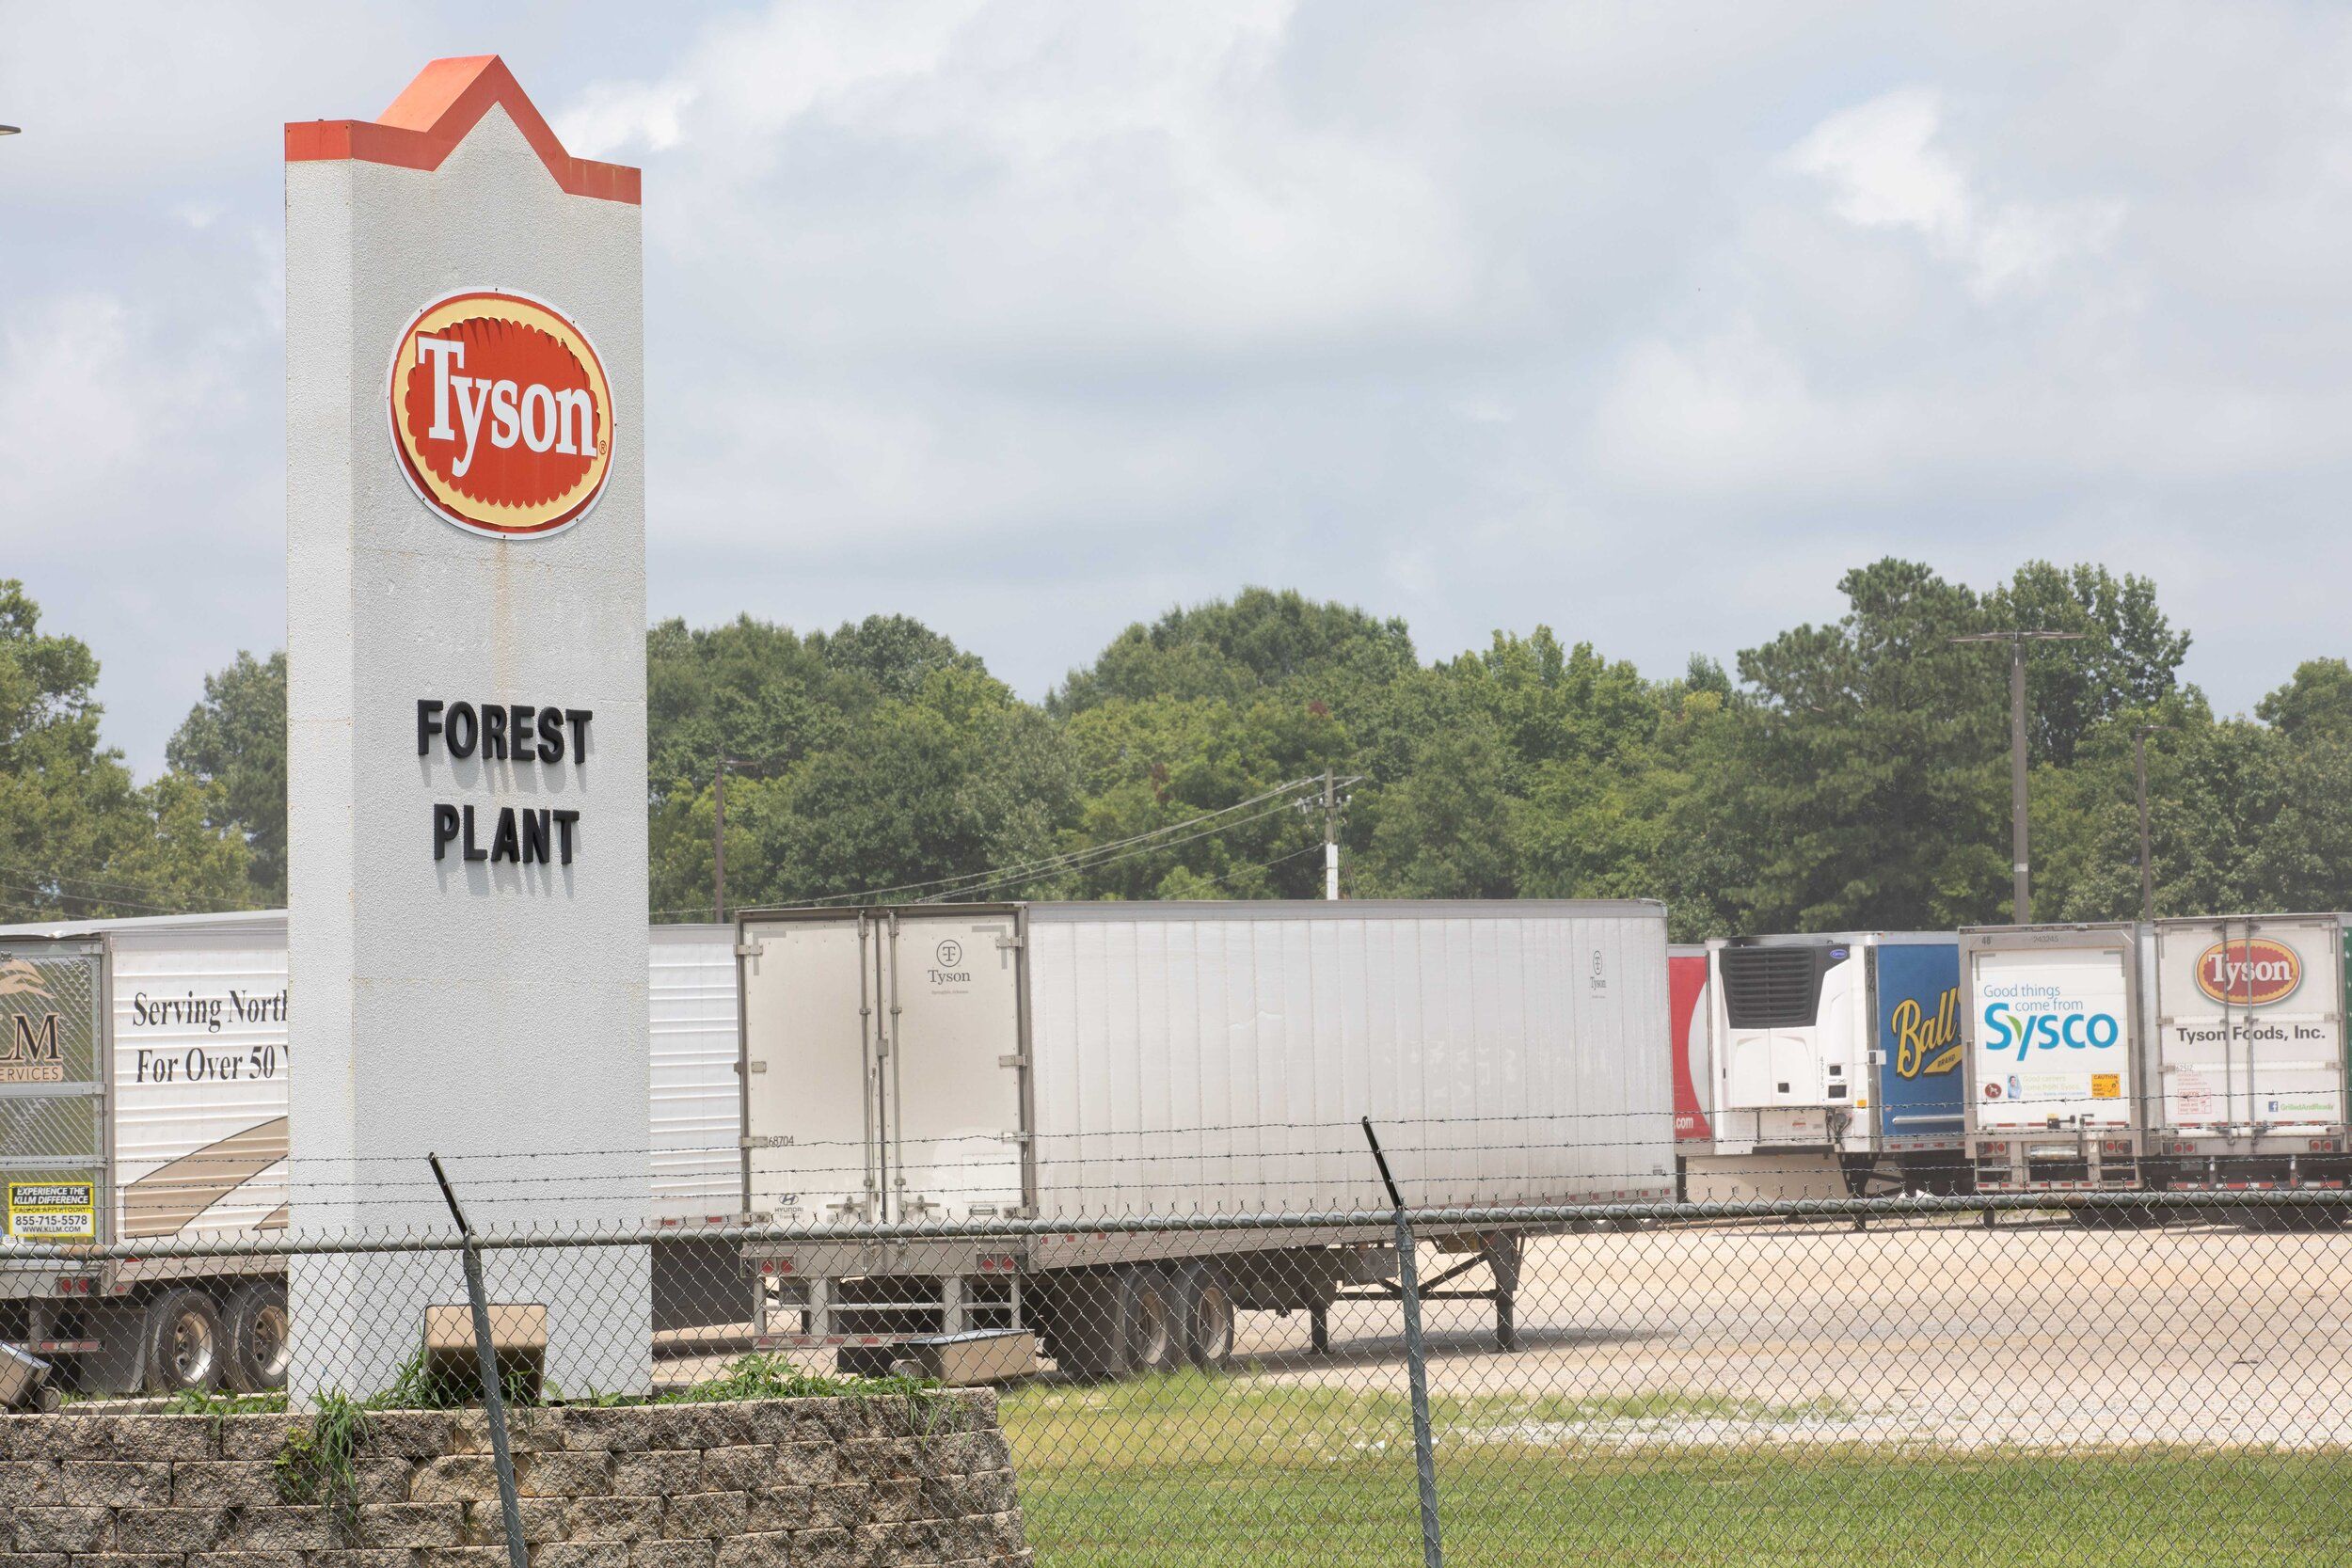 Tyson Foods’ Forest plant was among 15 poultry plants across the South granted waivers by the USDA in April that allowed them to increase processing line speeds despite histories of severe injuries, Occupational Safety and Health Administration violations or the recent COVID-19 outbreak, according to a report by the National Employment Law Project. Image by Sarah Warnock/MCIR. United States, 2020.